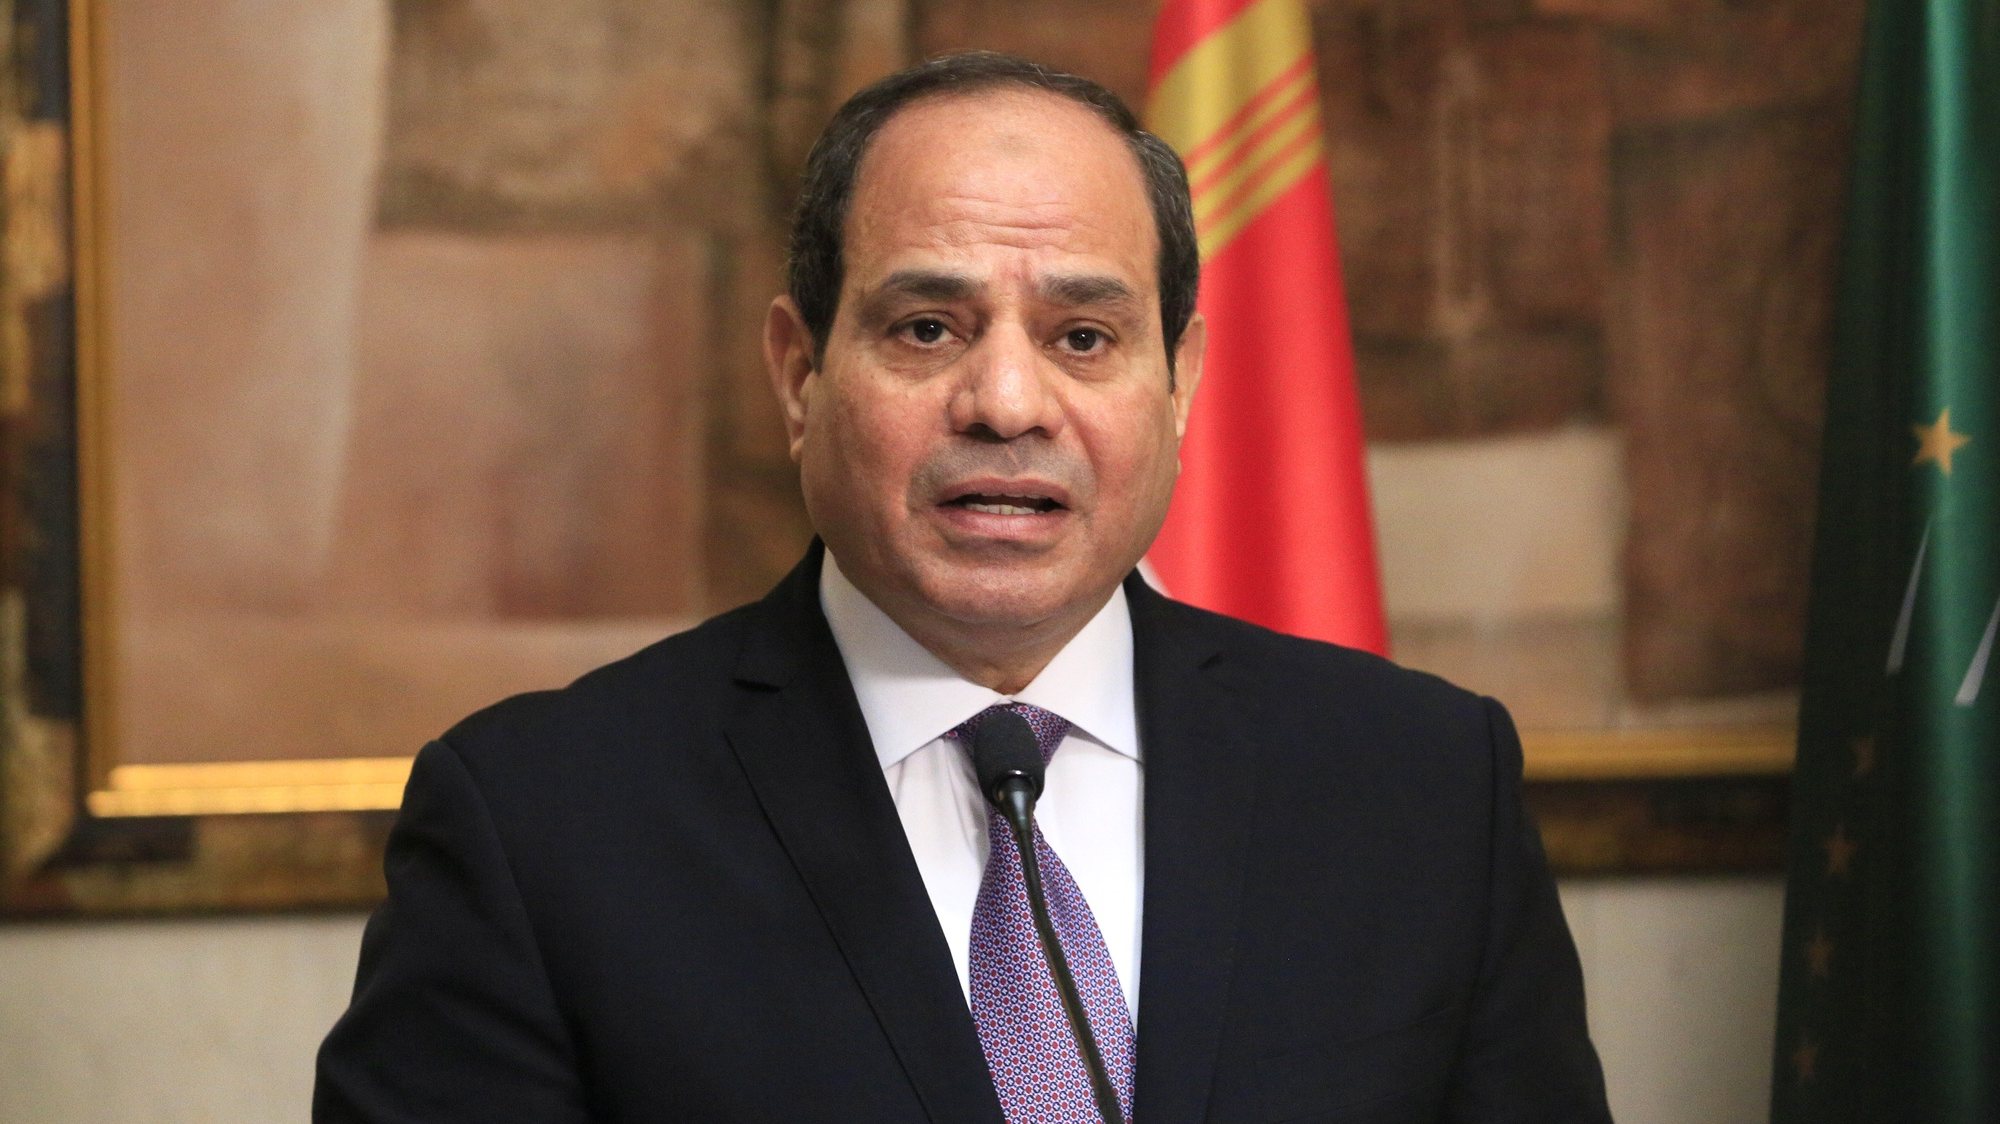 epa07498774 Egypt&#039;s President Abdel Fattah al-Sissi speaks at the presidential palace in Abidjan during a welcoming ceremony in Abijan, Ivory Coast, 11 April 2019. The President of the Arab Republic of Egypt Abdel Fattah Al-Sissi arrived Wednesday evening in Abidjan where he makes a visit of friendship and work of 48 hours. This visit of the Egyptian president in Ivory Coast is part of the part of a West African tour he began Sunday in Guinea. After the Ivorian stage, Abdel Fattah Al-Sissi is expected in Senegal.  EPA/LEGNAN KOULA